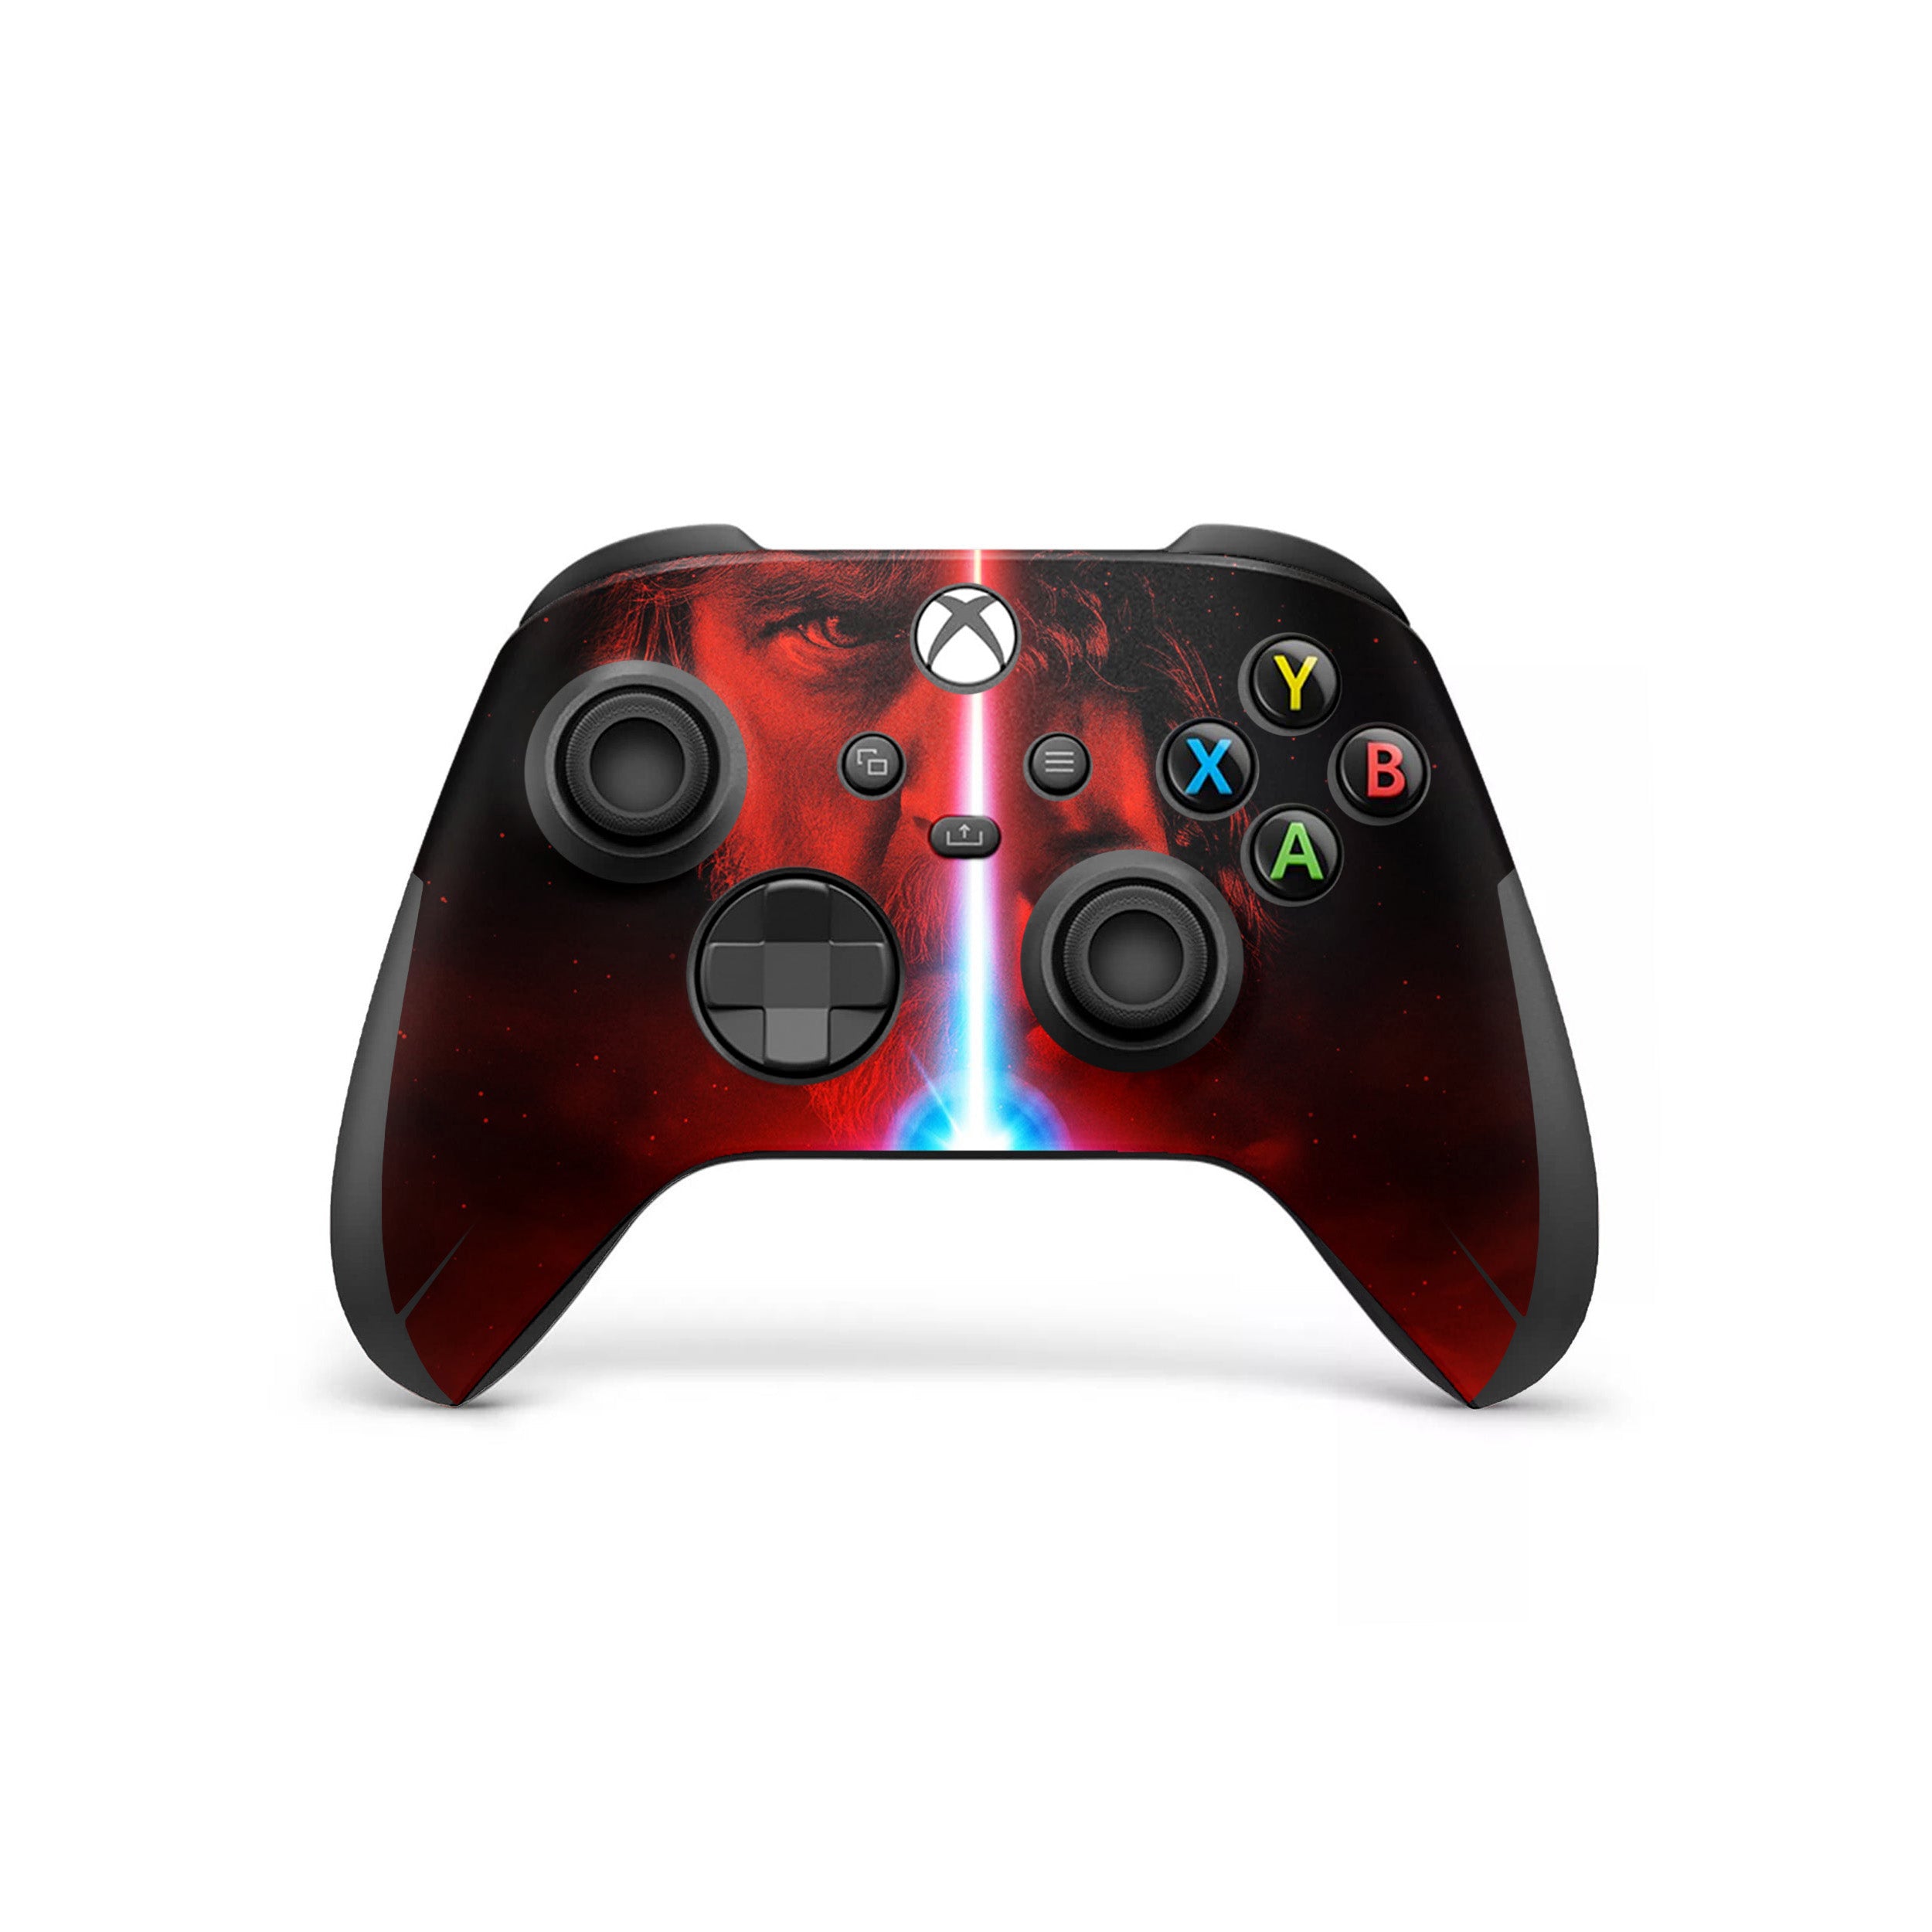 A video game skin featuring a Star Wars design for the Xbox Wireless Controller.